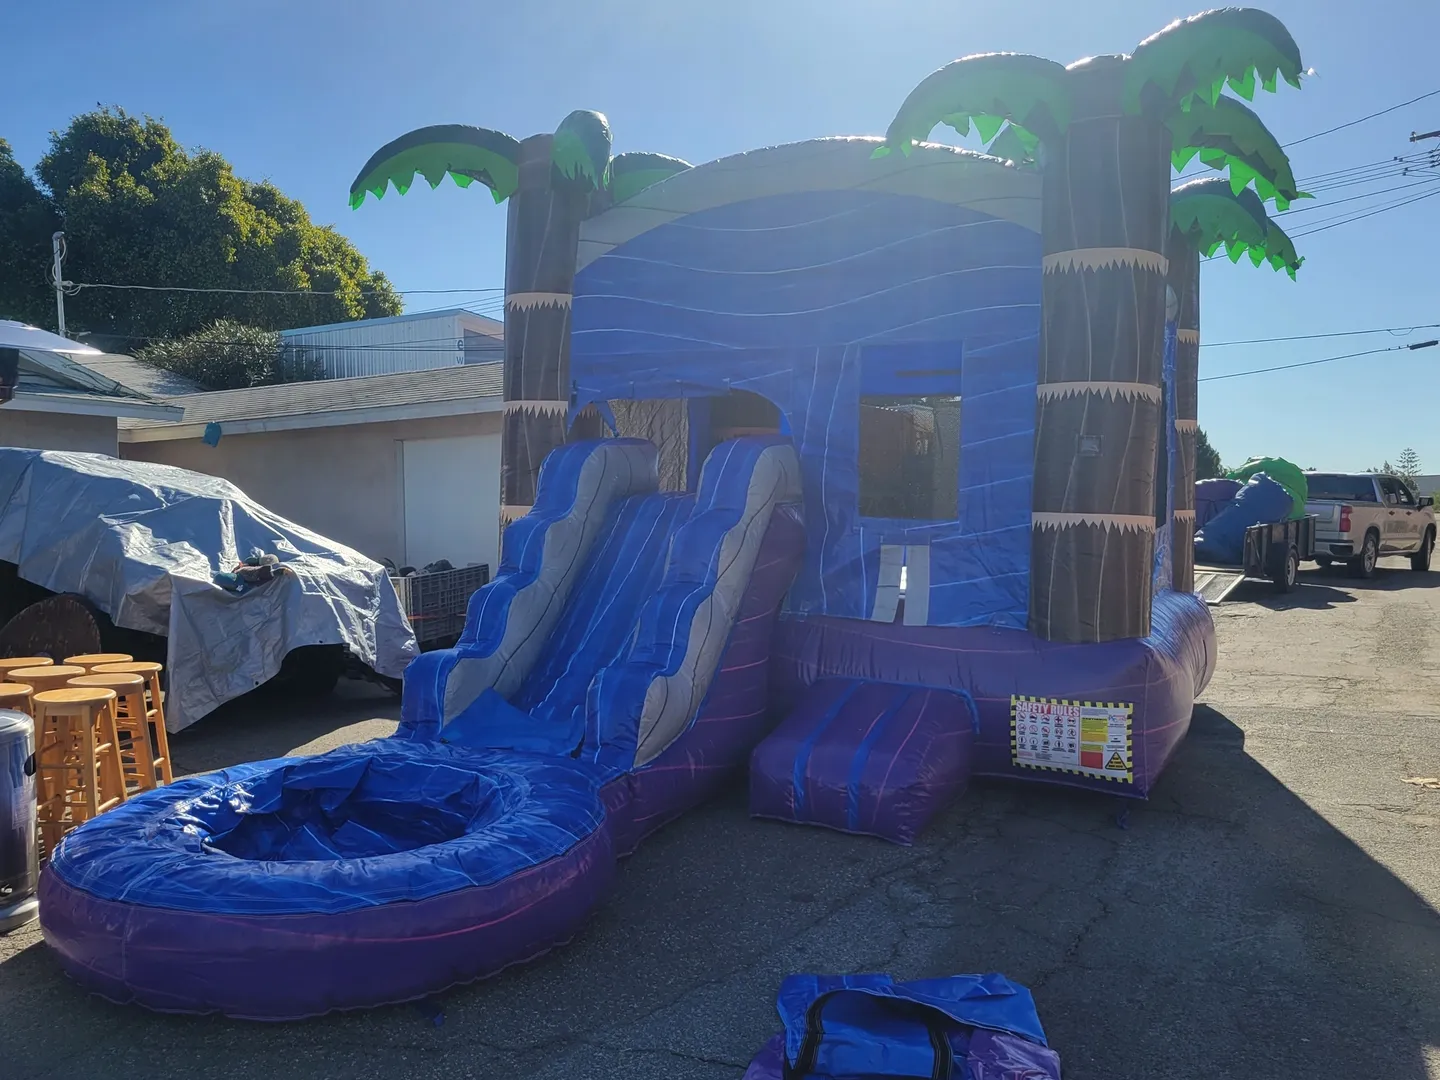 A blue and purple inflatable slide with palm trees.